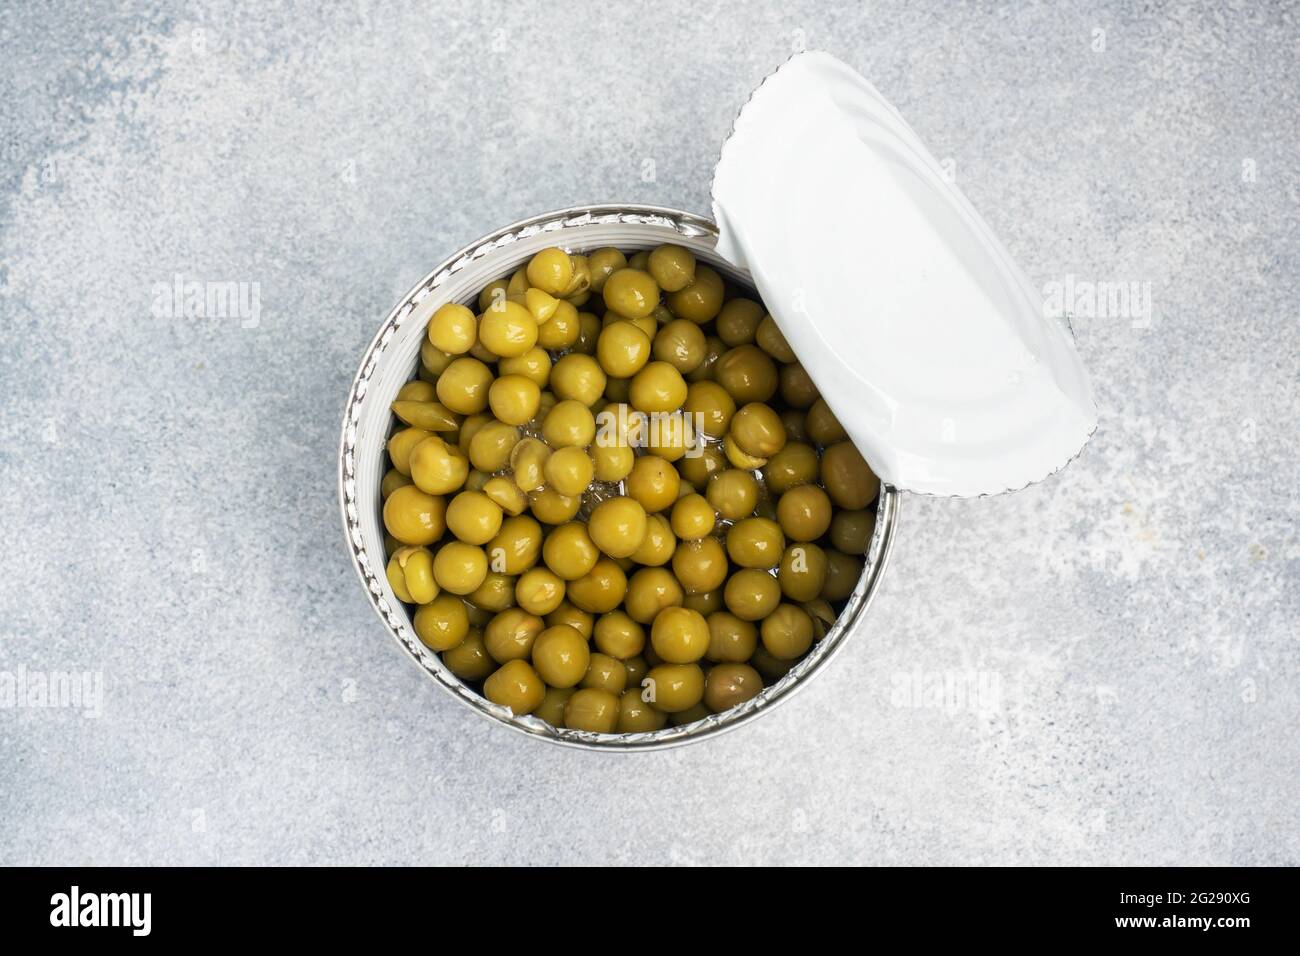 Tin open jar with canned peas on a gray concrete background. copy space Stock Photo